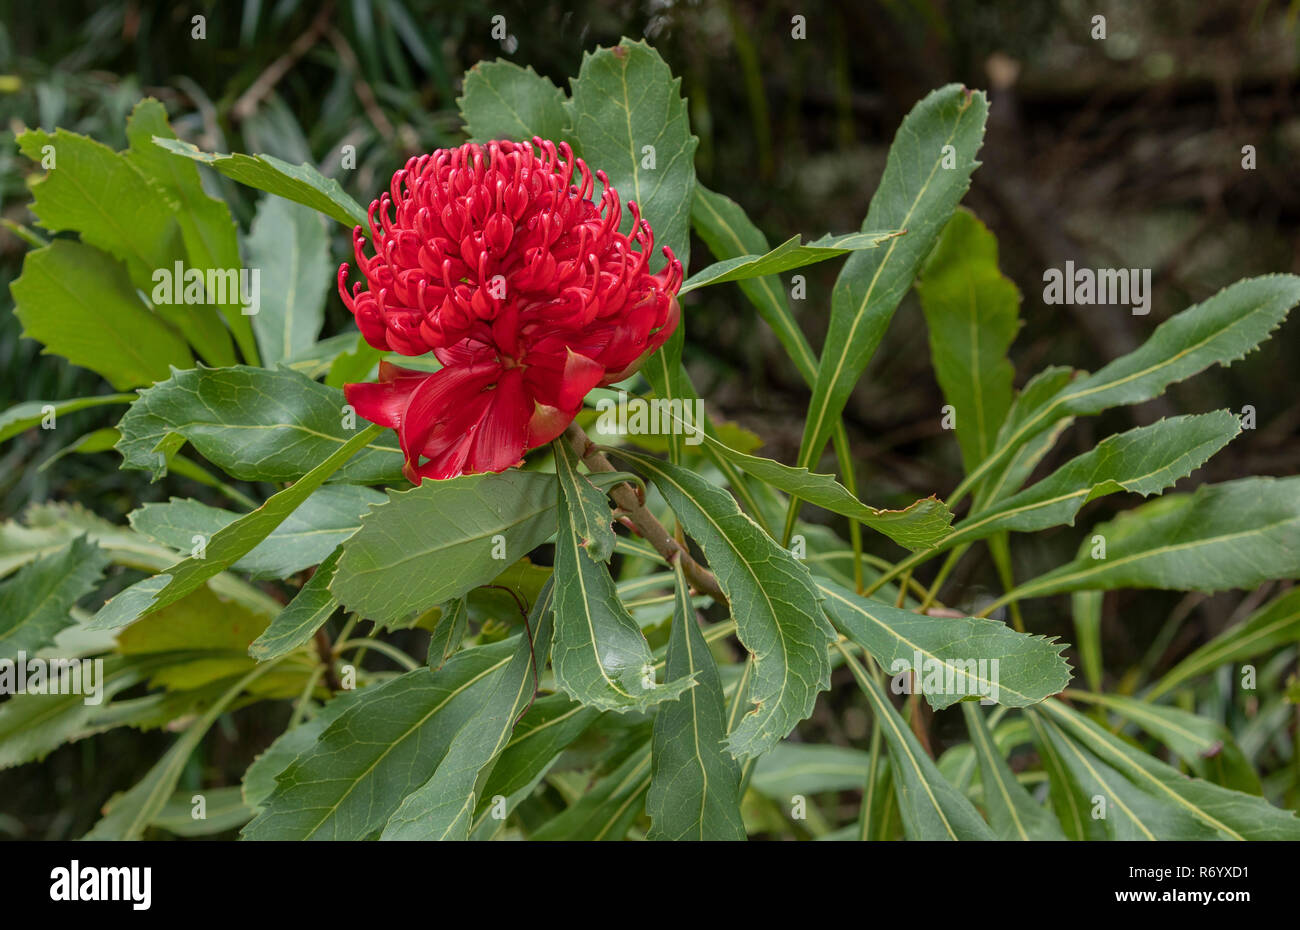 Waratah, Telopea speciosissima, in flower; floral emblem of New South Wales, Australia. Stock Photo